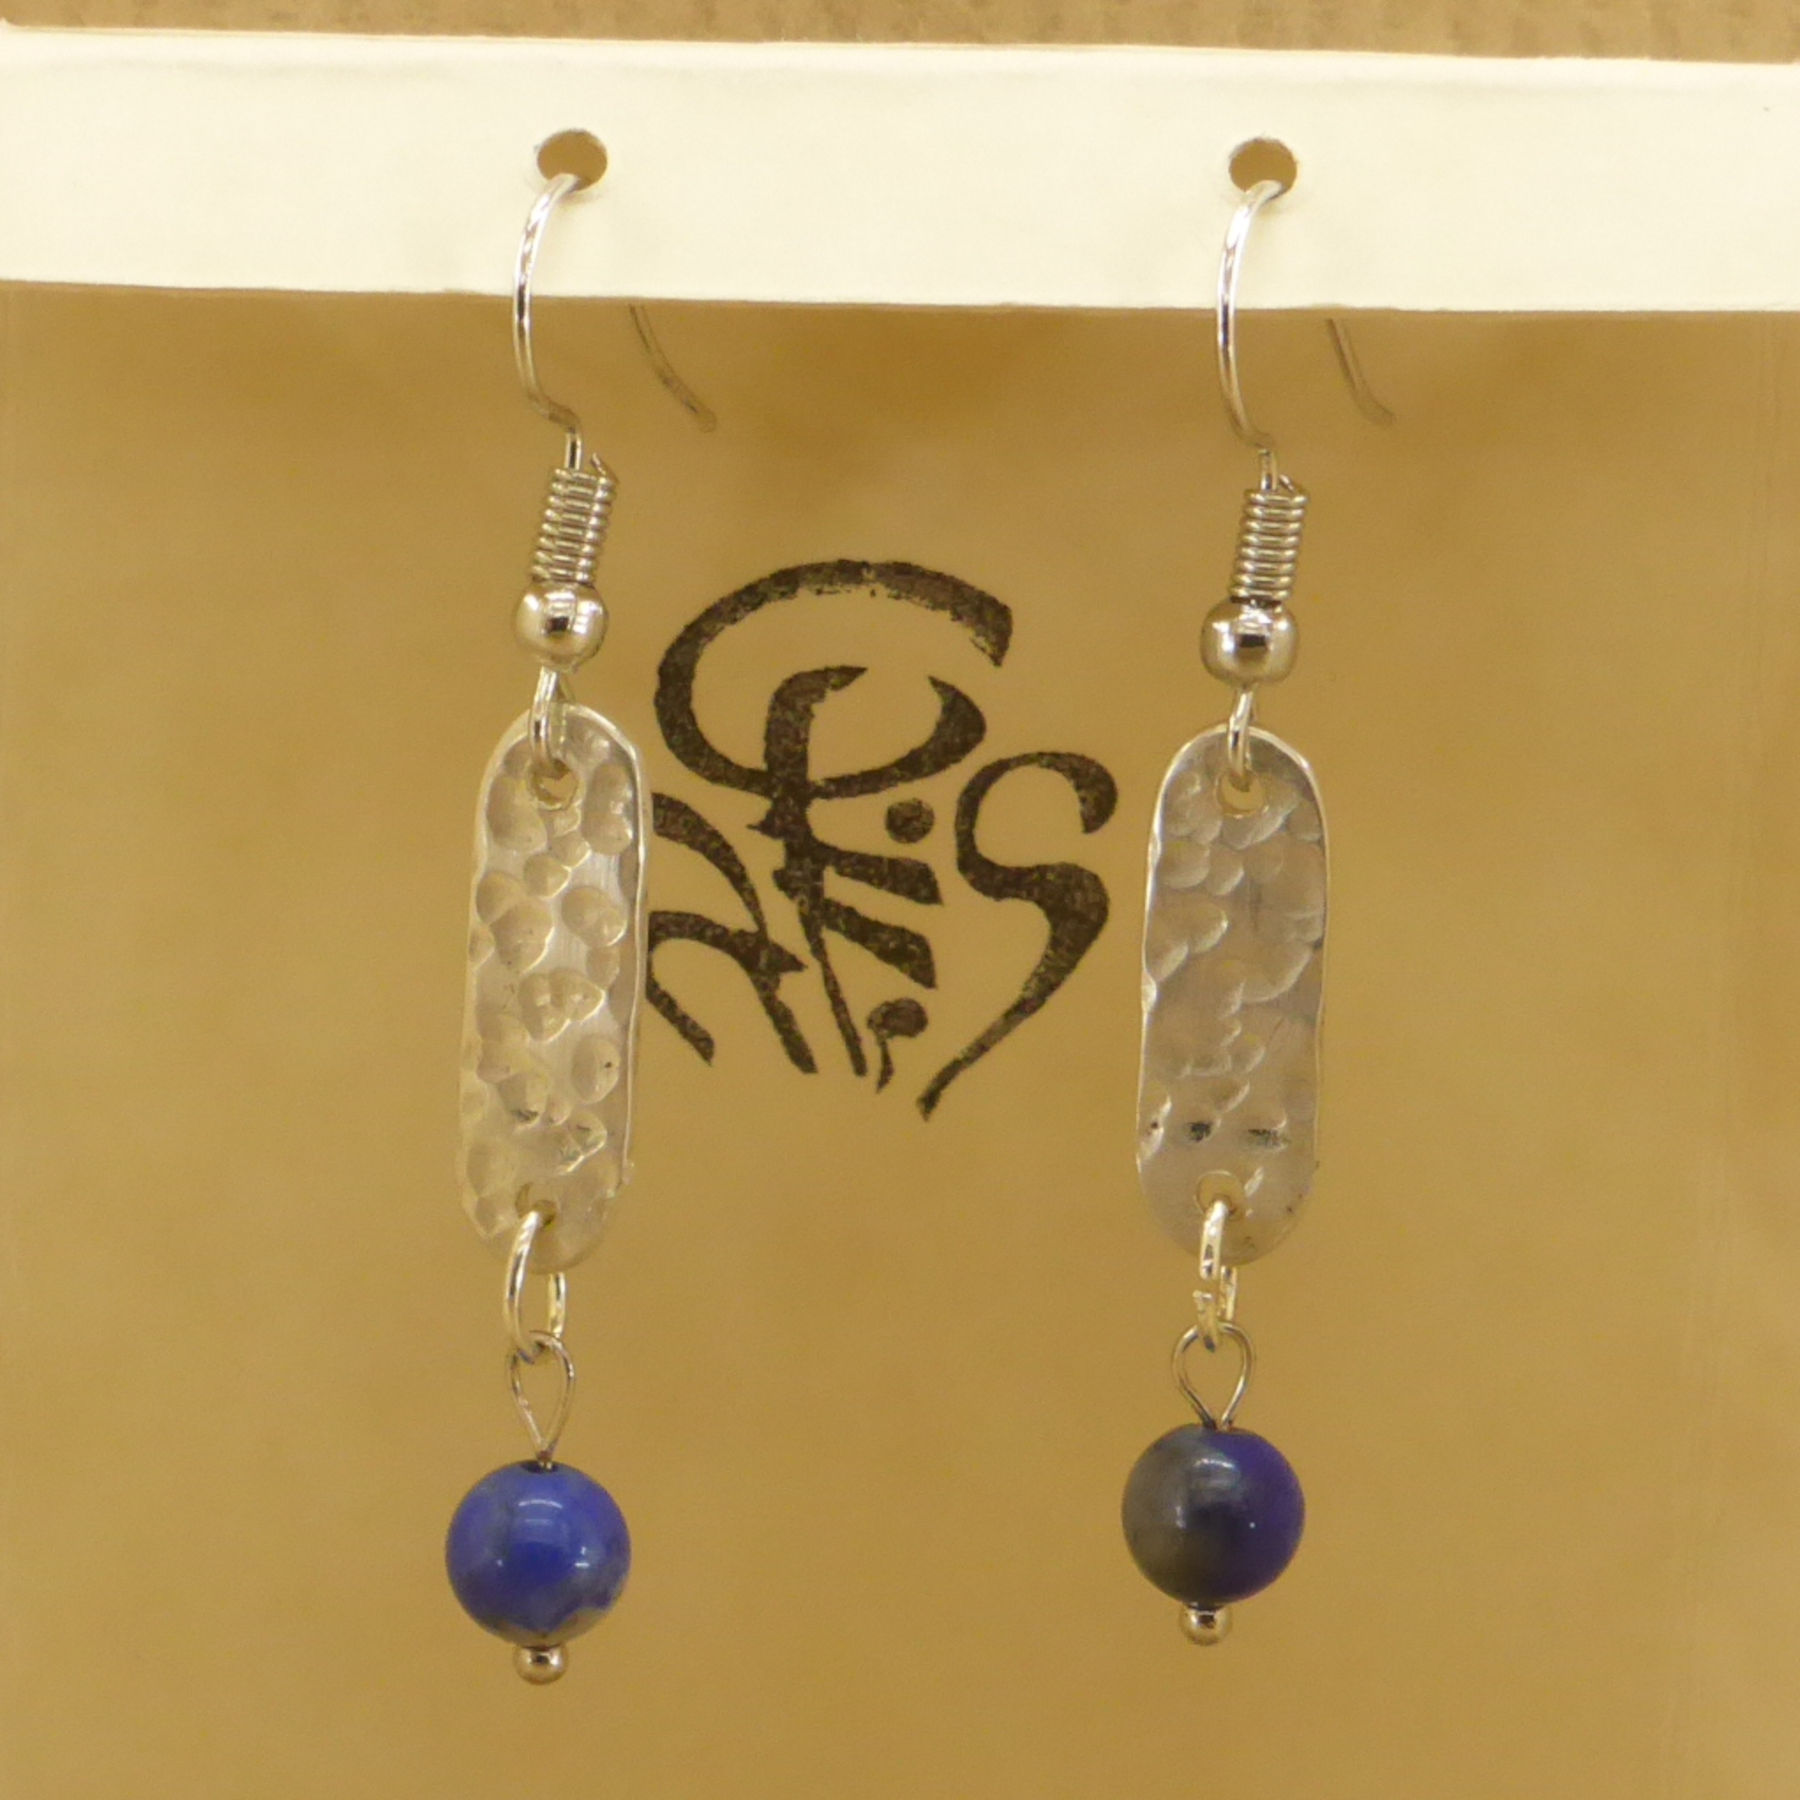 Hammered 925 silver oblong earrings, lapis lazuli pearl